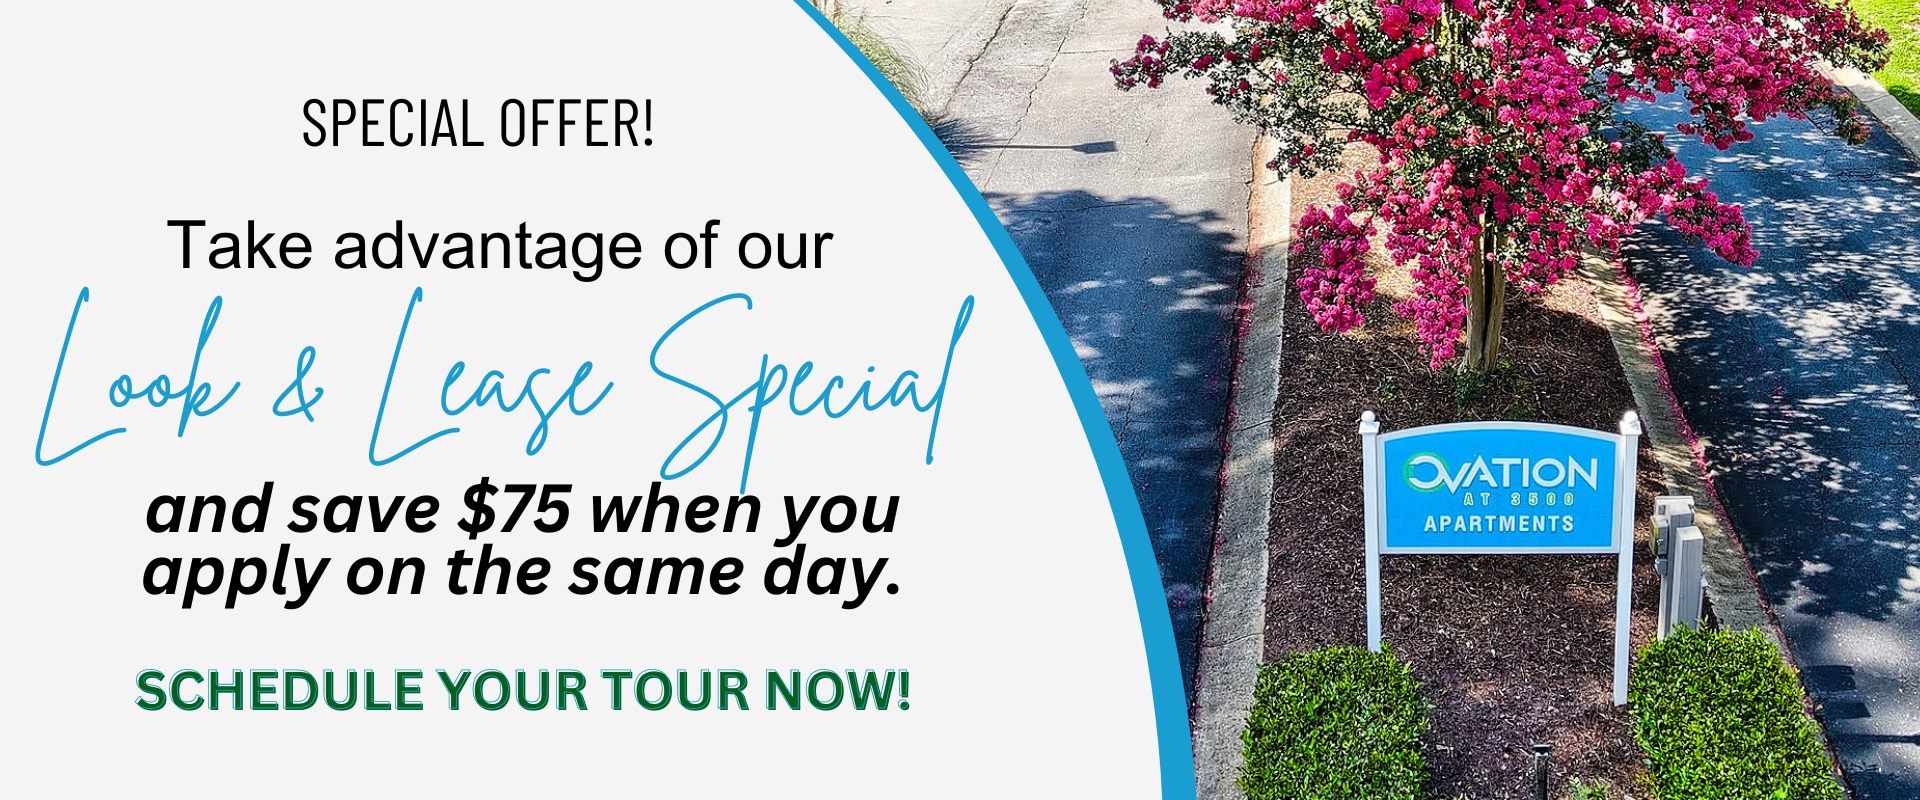 Take advantage of our Look & Lease Special and save $75 when you apply on the same day.   Schedule your tour now!